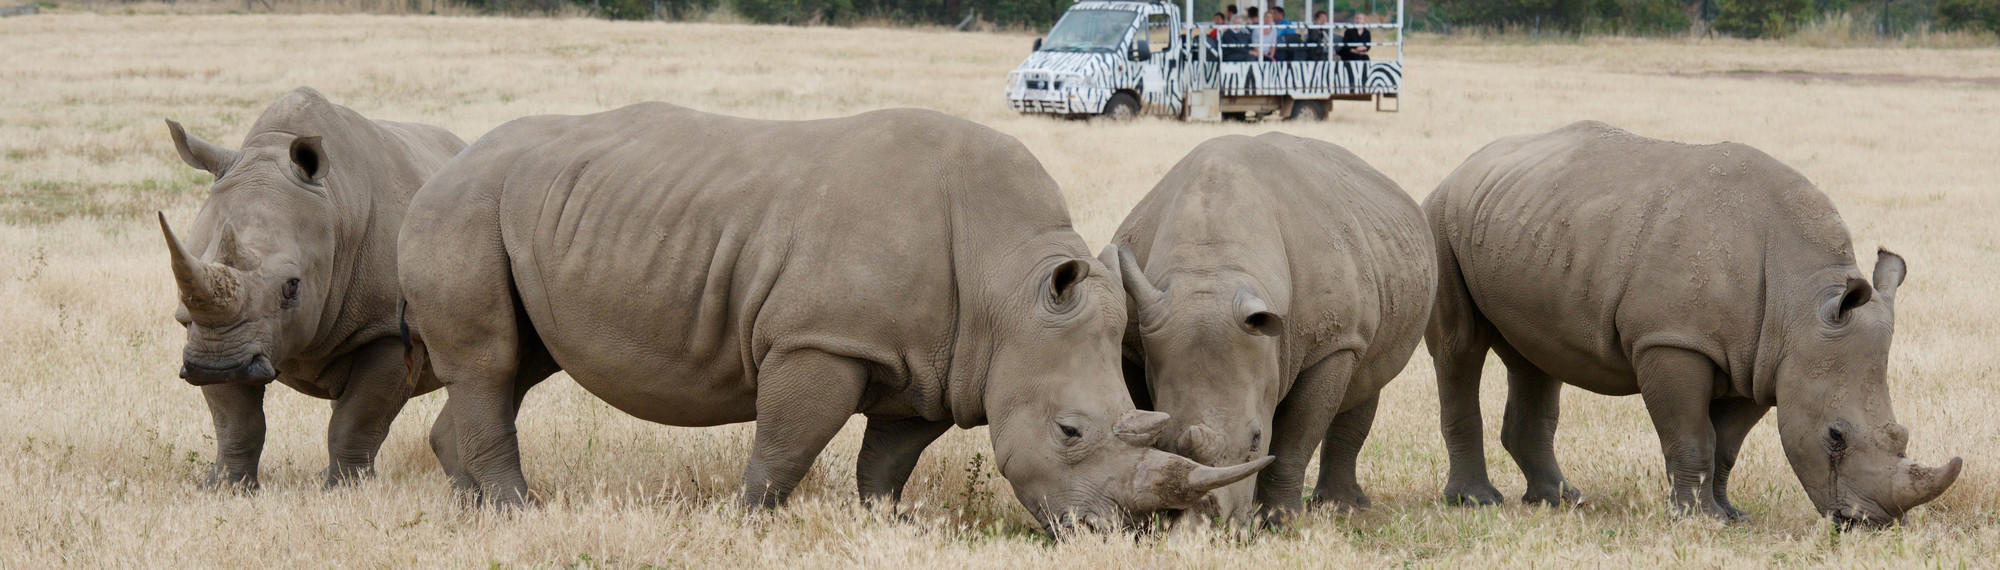 Four rhinos stand in a line eating some grass. A vehicle with people standing on it can be seen in the background watching the rhinos.